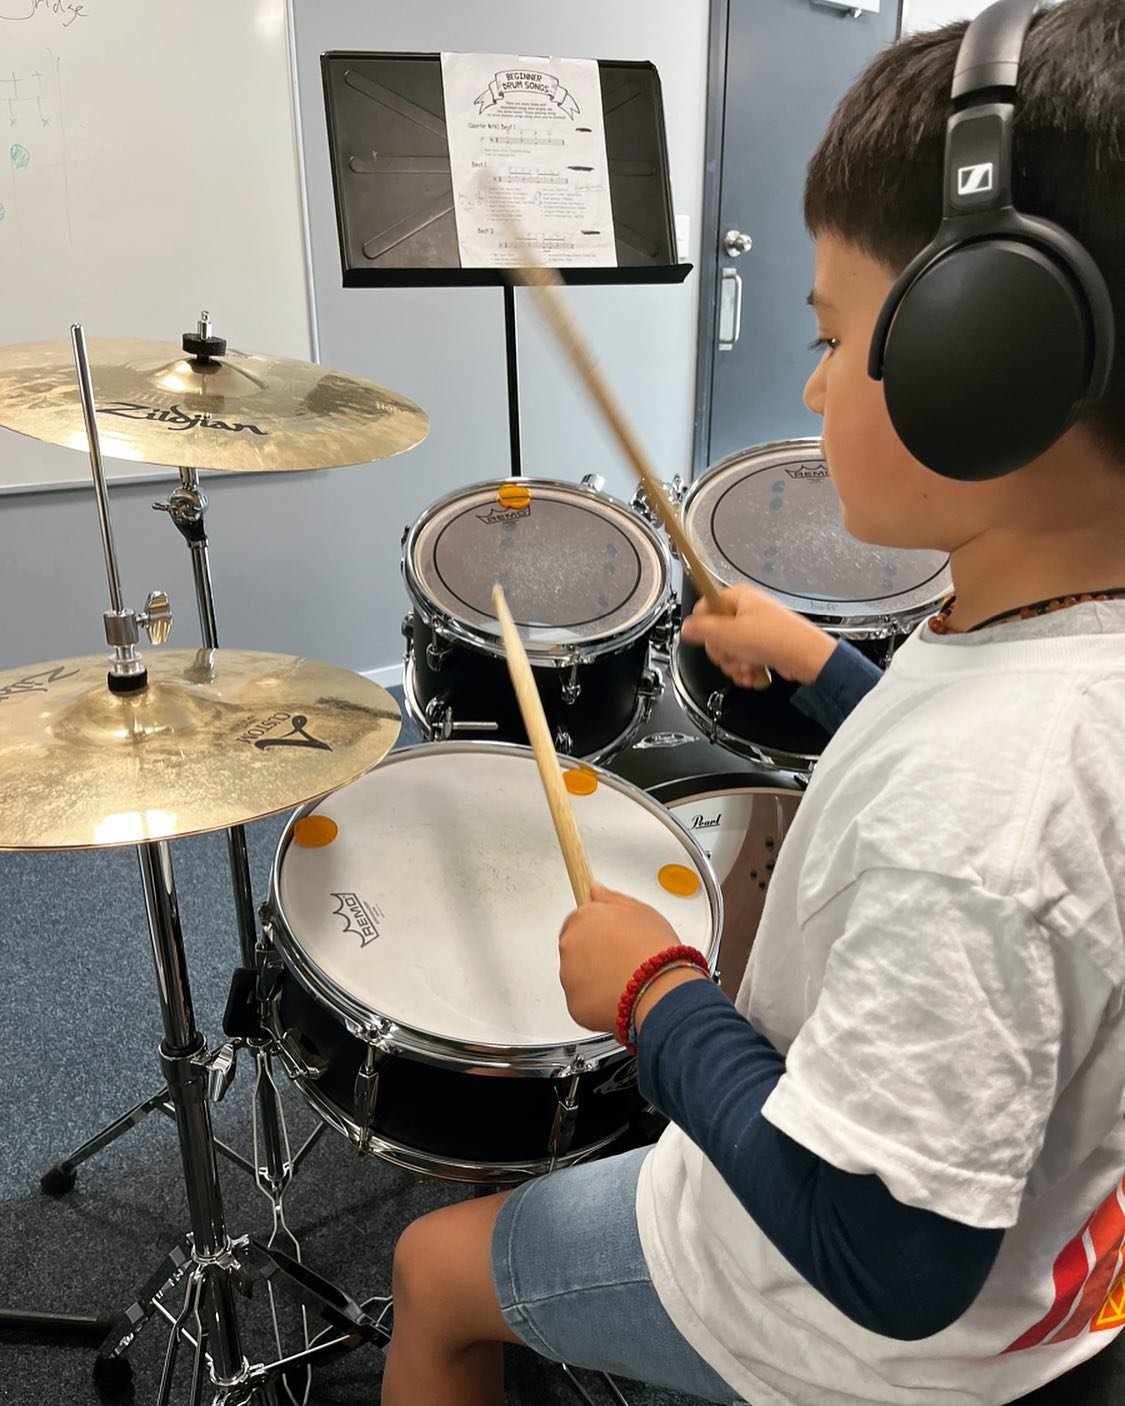 Term 2 is underway at @patiencedrumstudio! Here&rsquo;s Antim rocking on the drum kit! 

Get in touch if you&rsquo;re interested in drum lessons, only a few available spots remain! 

https://scottpatience.com/patiencedrumstudio 

#drumlessons #drumst